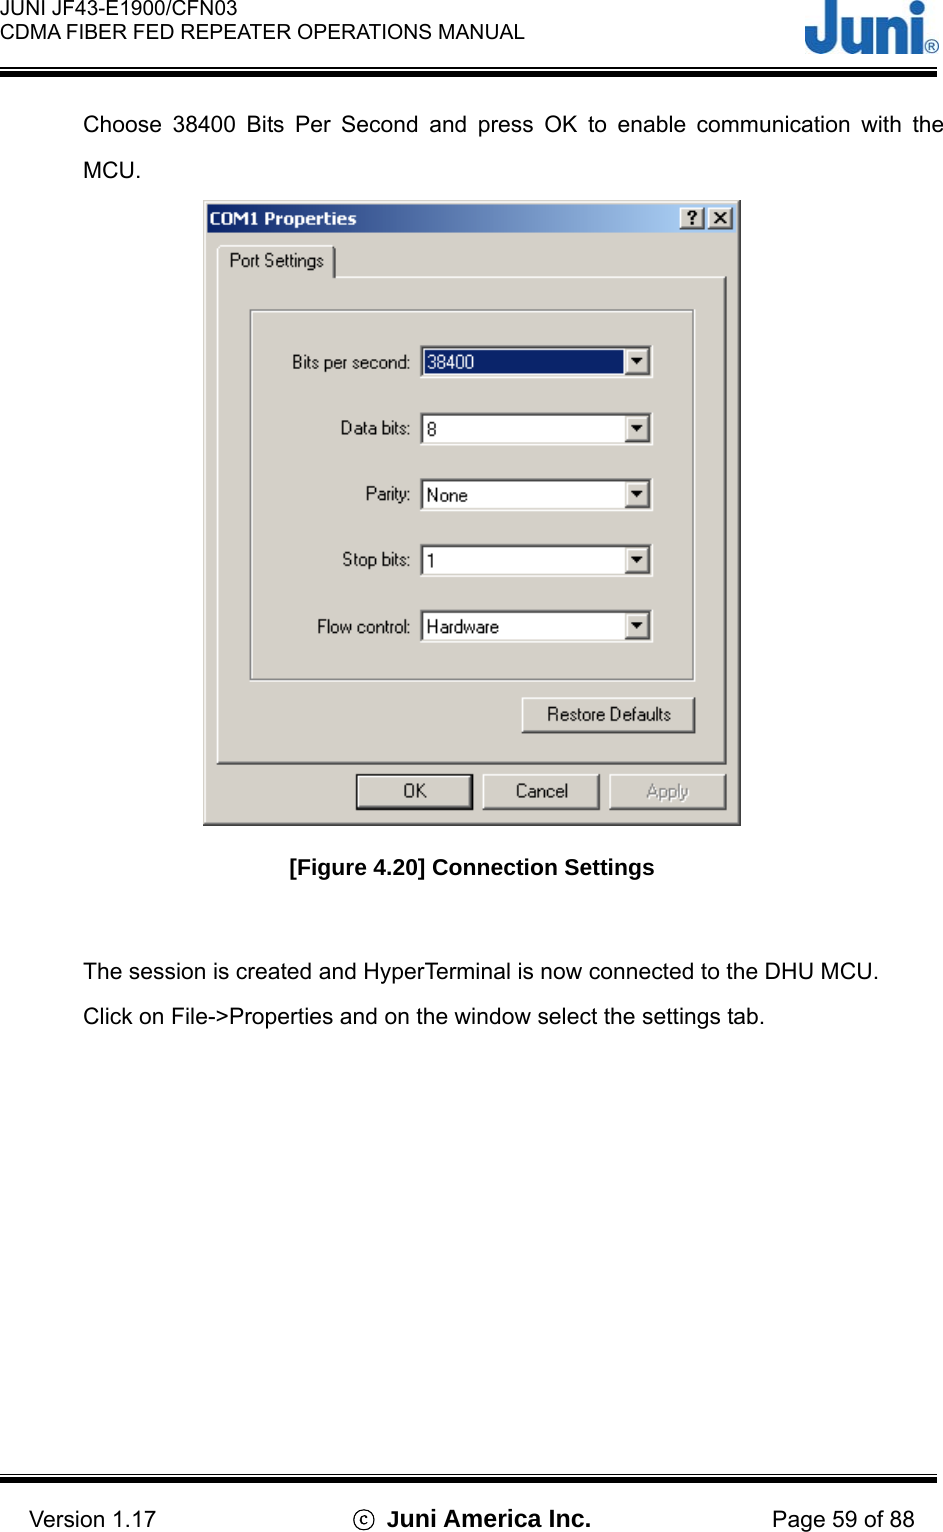  JUNI JF43-E1900/CFN03 CDMA FIBER FED REPEATER OPERATIONS MANUAL                                    Version 1.17  ⓒ Juni America Inc. Page 59 of 88 Choose 38400 Bits Per Second and press OK to enable communication with the MCU.  [Figure 4.20] Connection Settings  The session is created and HyperTerminal is now connected to the DHU MCU. Click on File-&gt;Properties and on the window select the settings tab. 